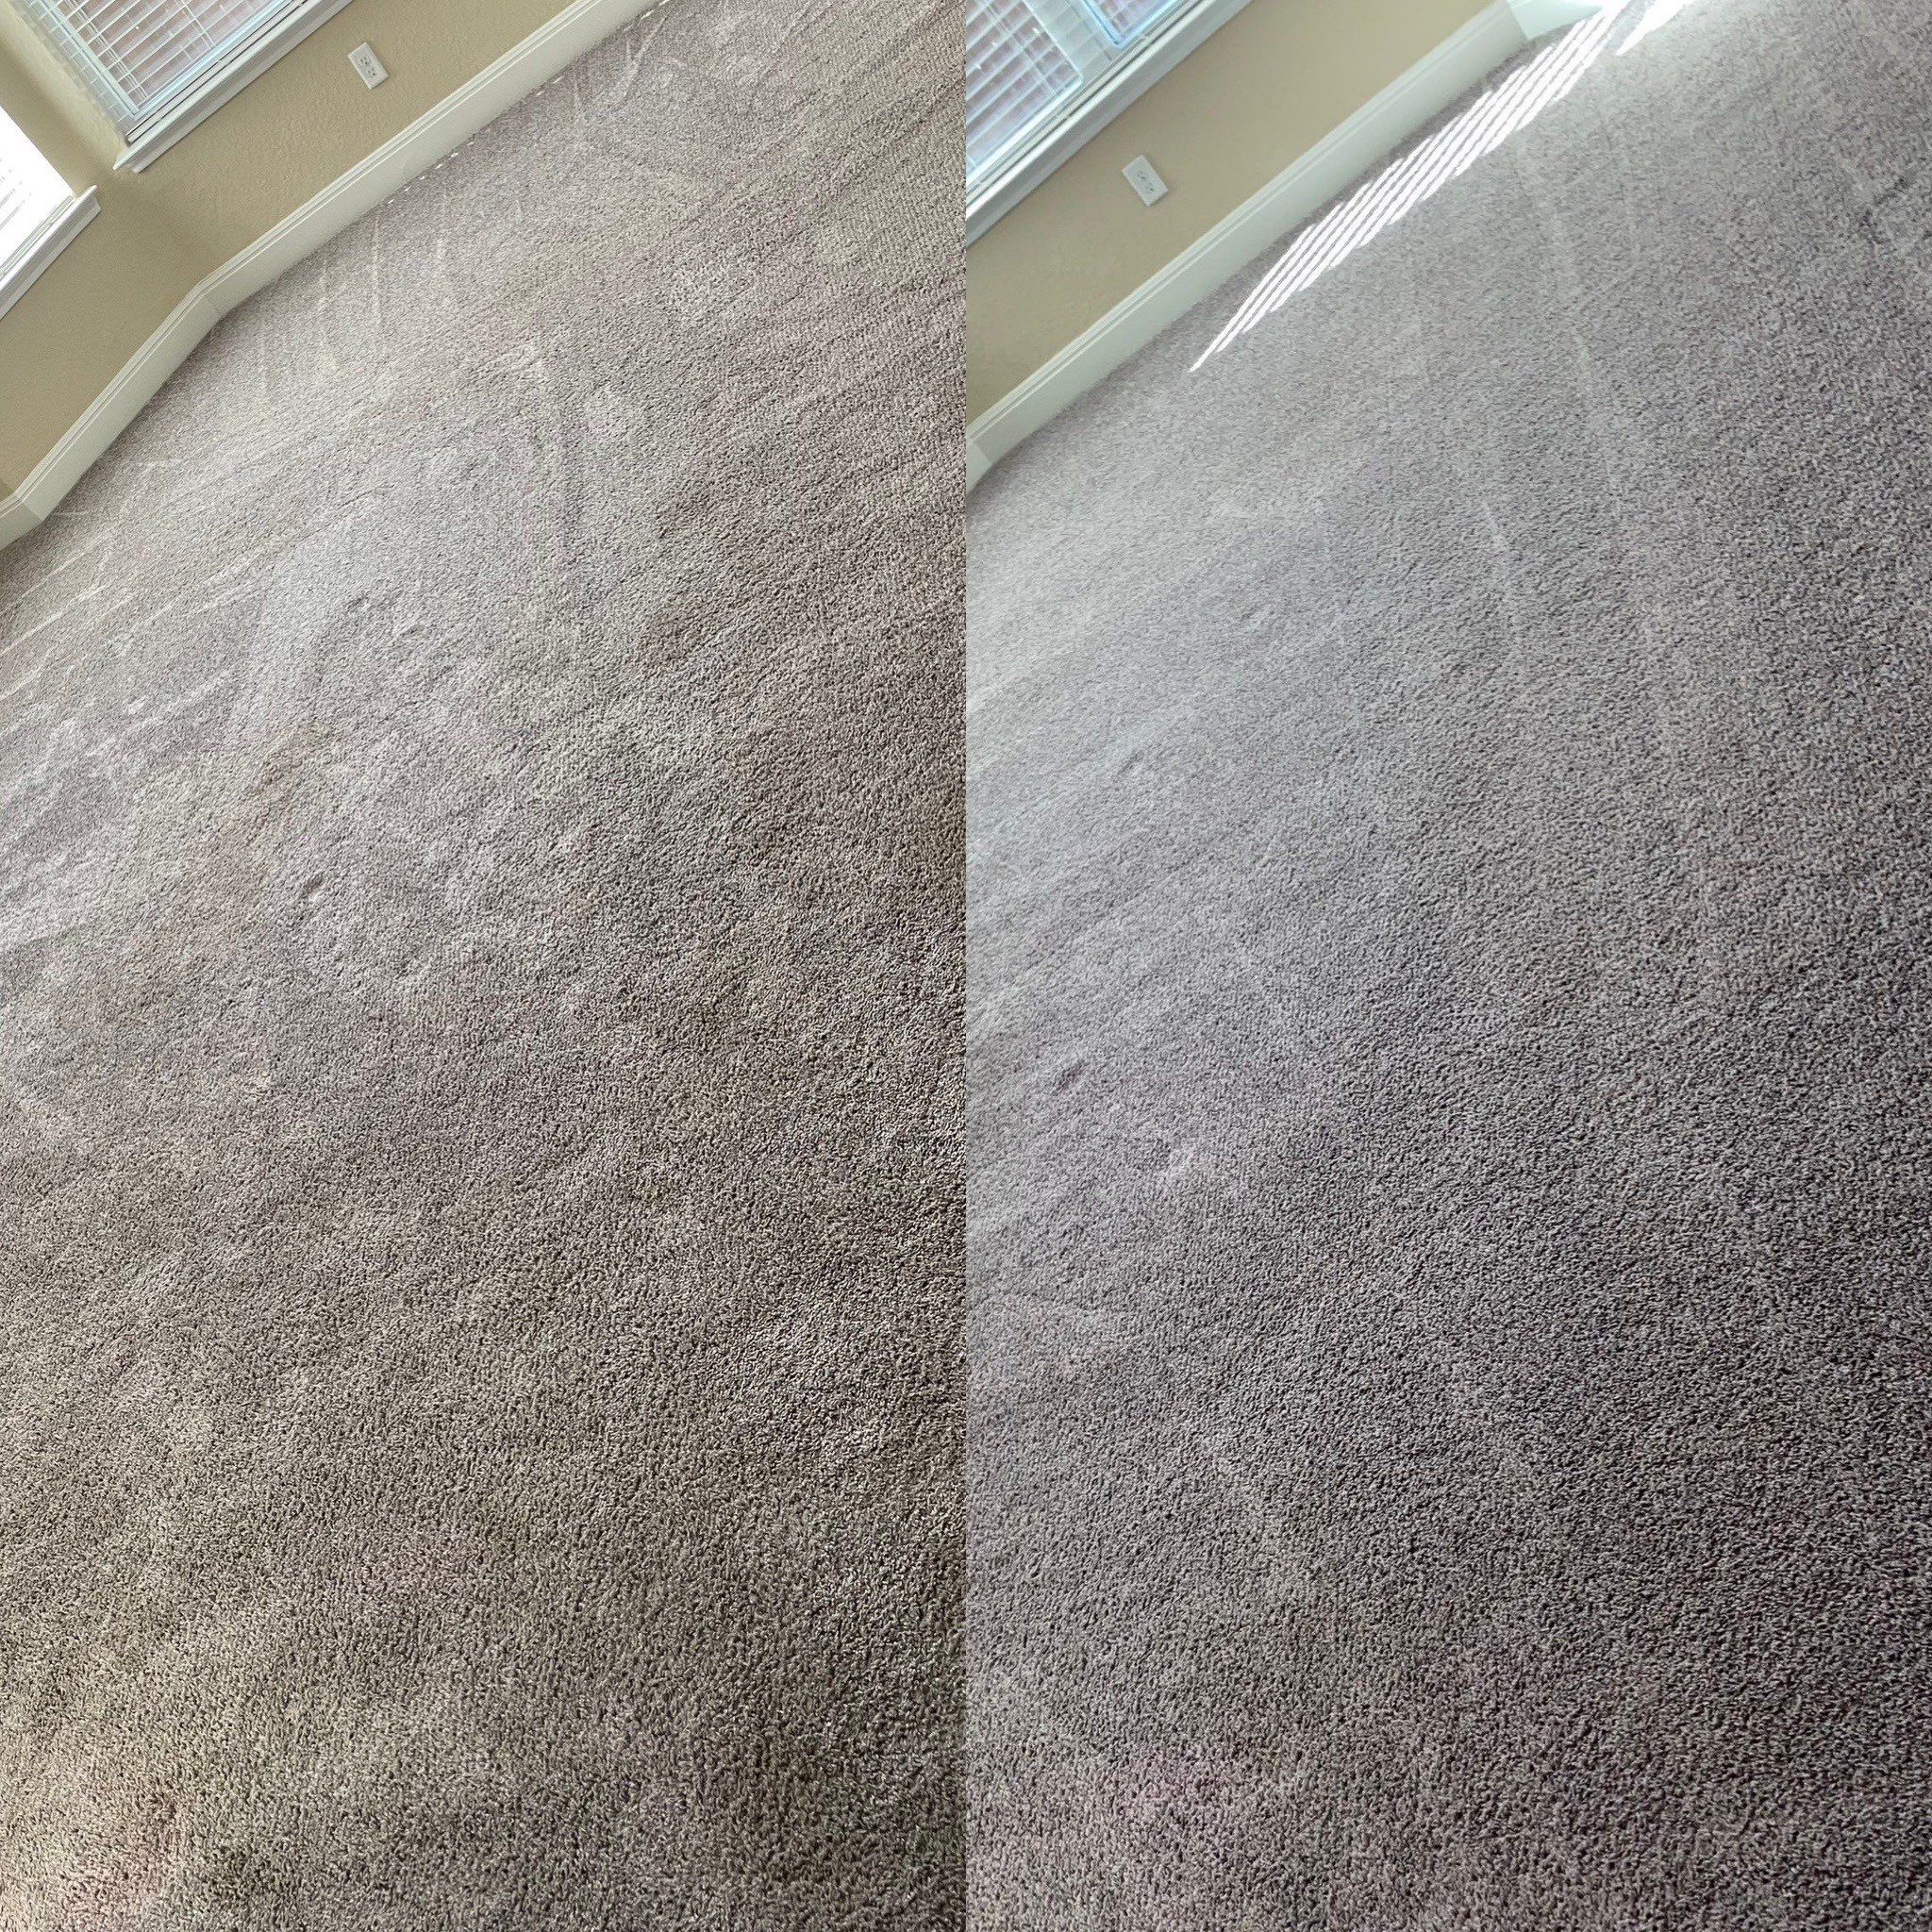 carpet cleaning service showing before and after results on carpeted floor areas in a residential room